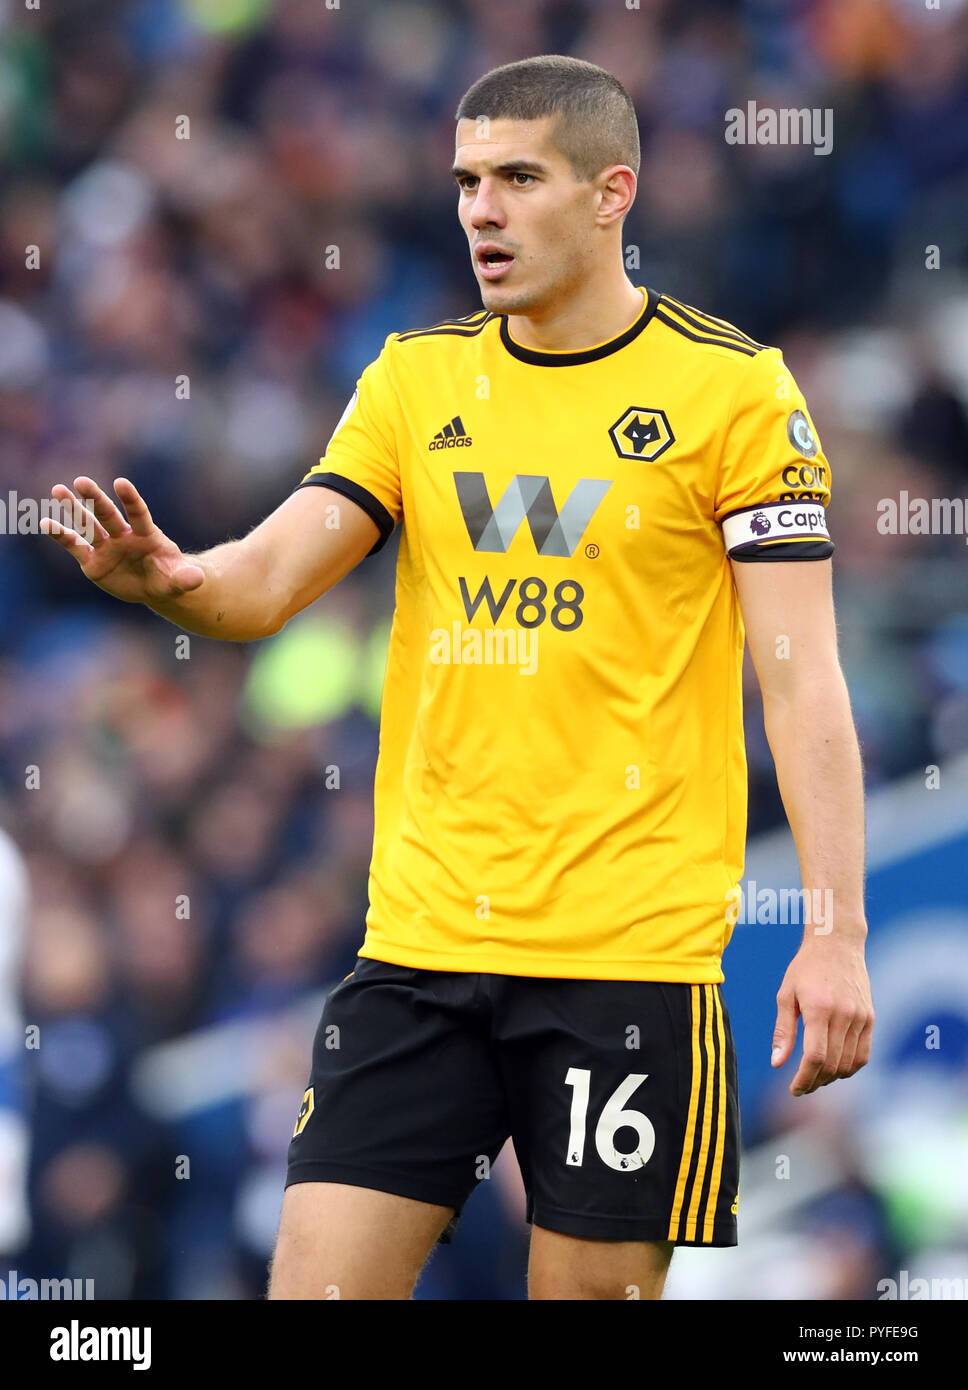 Wolverhampton Wanderers' Conor Coady during the Premier League match at The AMEX Stadium, Brighton. PRESS ASSOCIATION Photo. Picture date: Saturday October 27, 2018. See PA story SOCCER Brighton. Photo credit should read: Gareth Fuller/PA Wire. RESTRICTIONS: No use with unauthorised audio, video, data, fixture lists, club/league logos or 'live' services. Online in-match use limited to 120 images, no video emulation. No use in betting, games or single club/league/player publications. Stock Photo